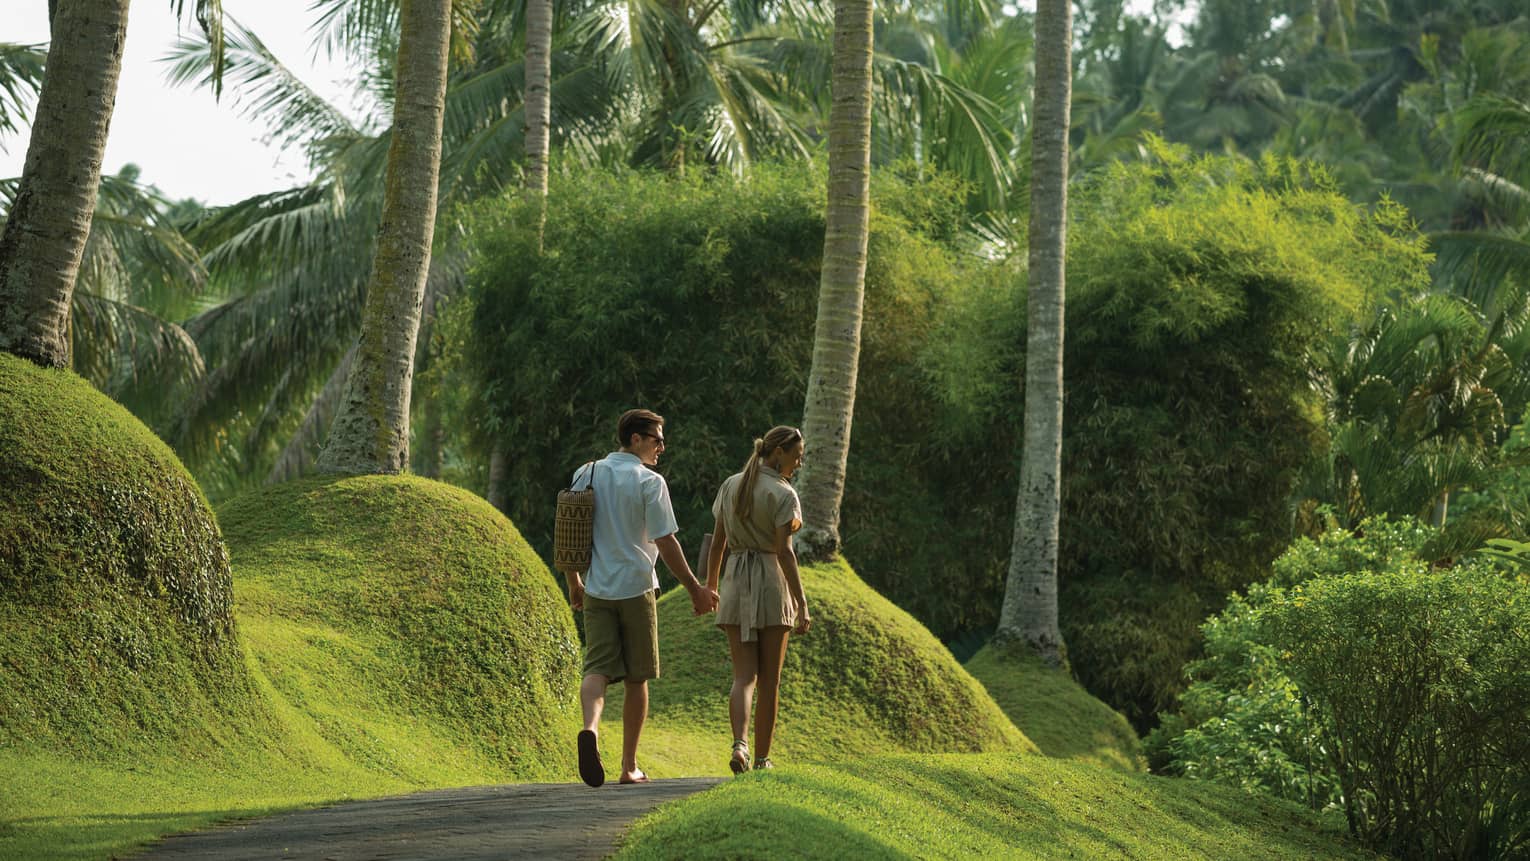 Guests holding hands and strolling through a garden in Bali